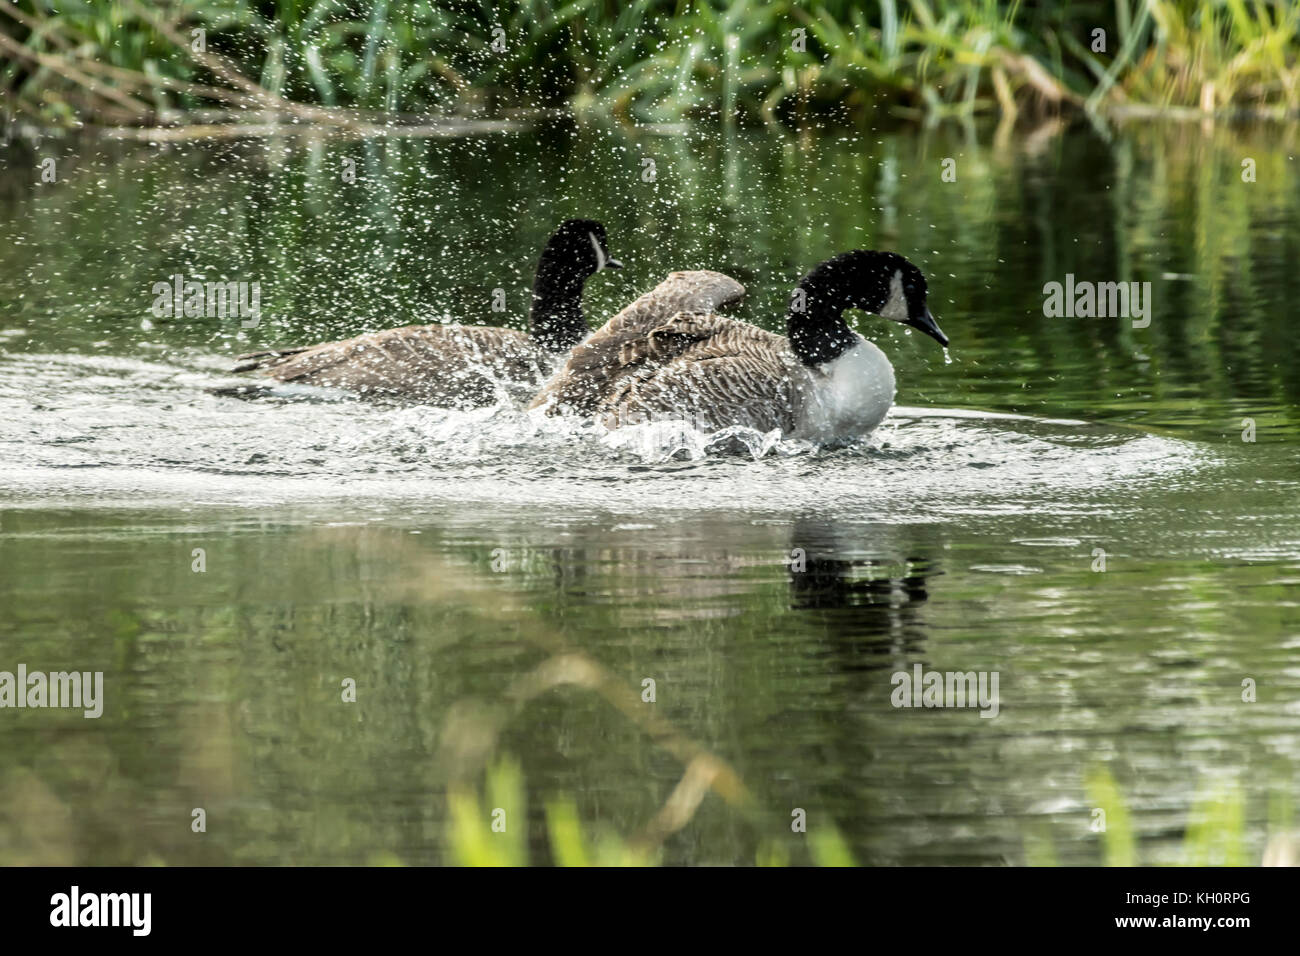 River Nene, Peterborough. 11th Nov, 2017. UK Weather. Canada Gesse enjoy a warmer the normal autumn day basking on the river after their migration flight to their winter ground's along the river Nene. Clifford Norton/Alamy Live News Stock Photo